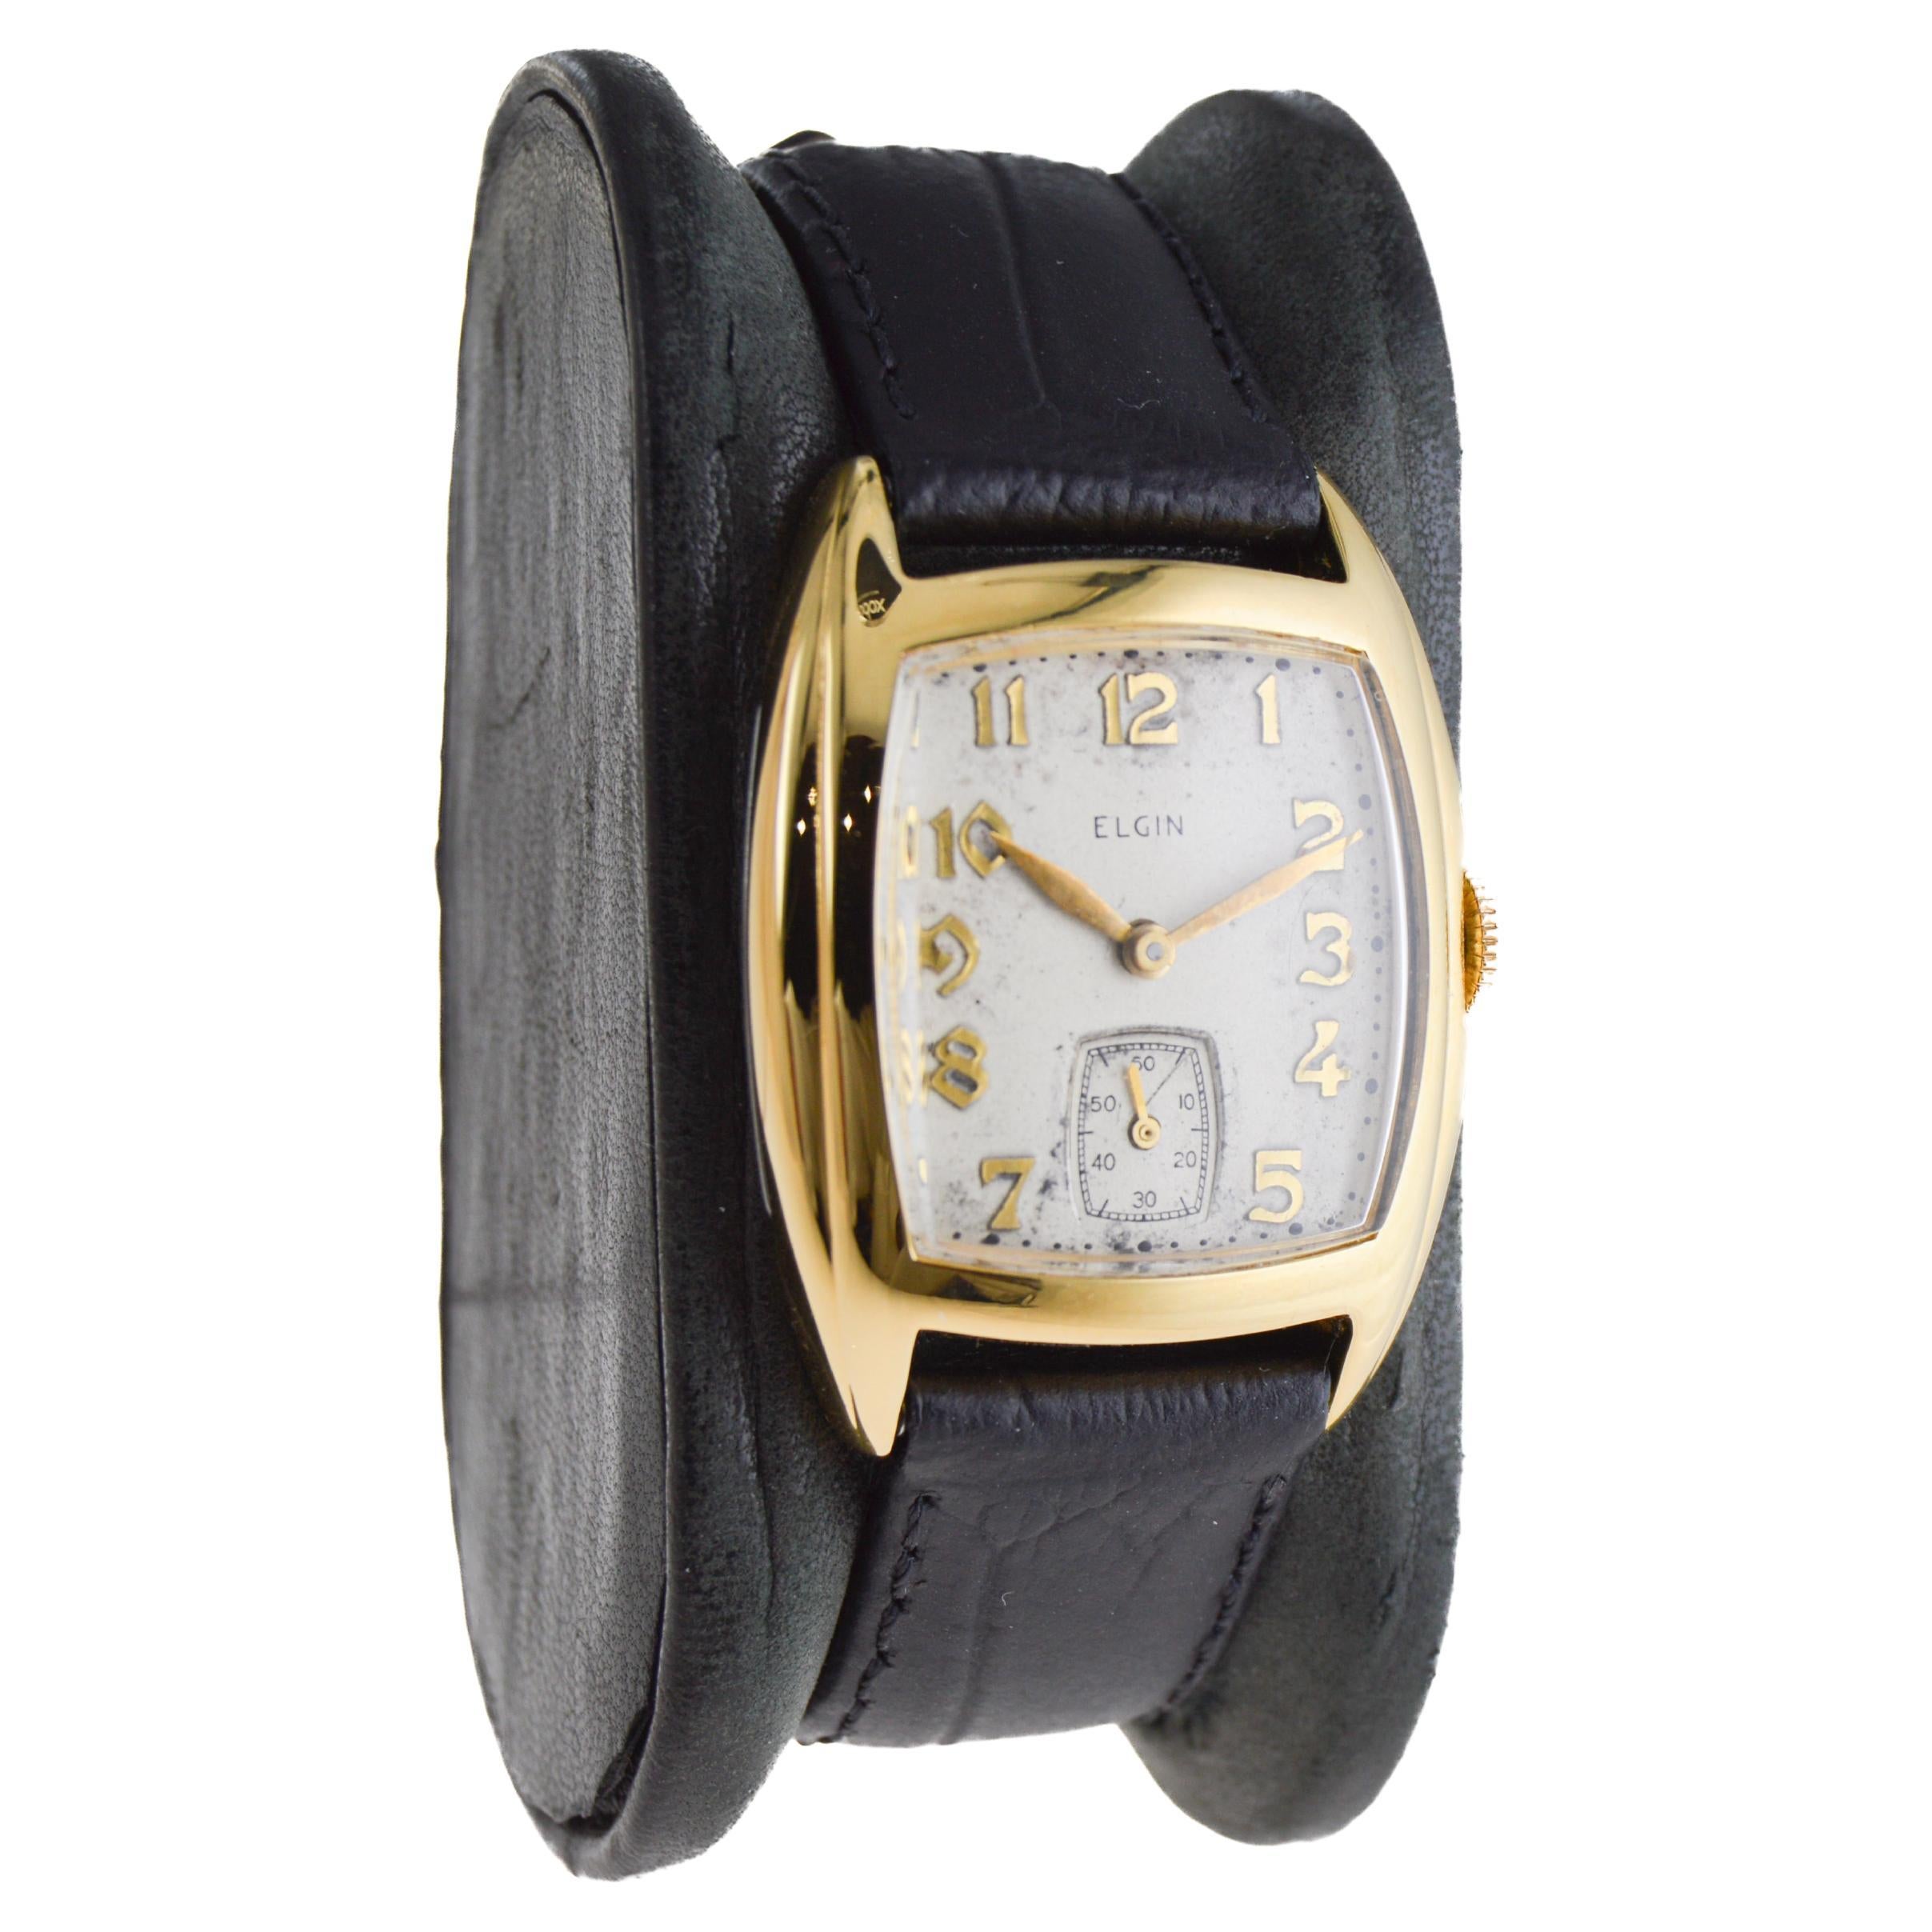 FACTORY / HOUSE: Elgin Watch Company
STYLE / REFERENCE: Art Deco / Tonneau Shape
METAL / MATERIAL: Yellow Gold Filled
CIRCA / YEAR: 1940's
DIMENSIONS / SIZE: Length 36mm X Width 27mm
MOVEMENT / CALIBER: Manual Winding / 15 Jewels / Caliber 10 1/2